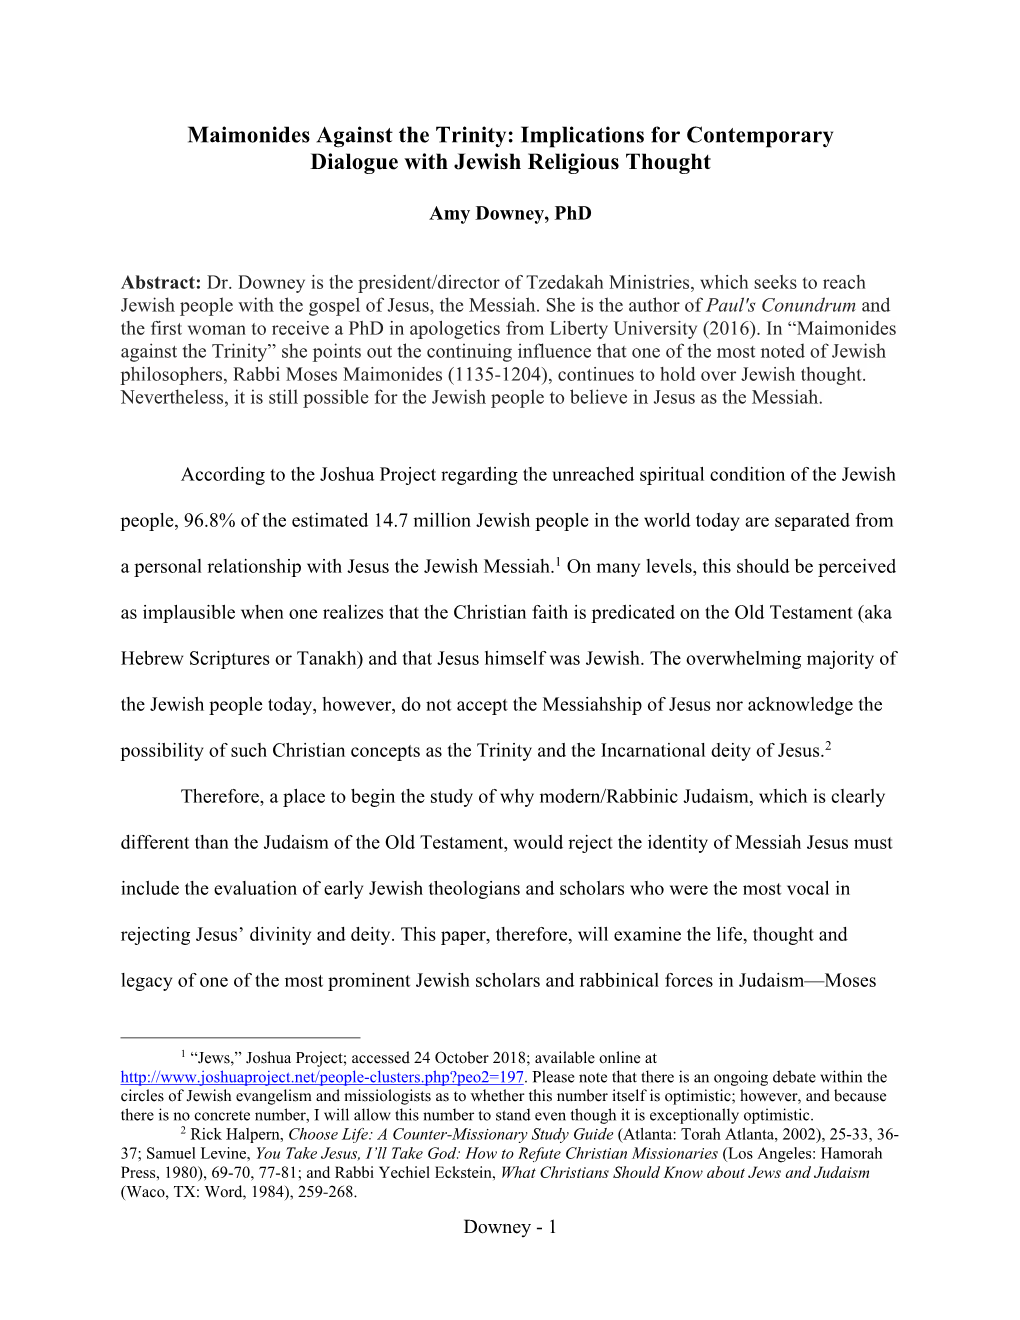 Maimonides Against the Trinity: Implications for Contemporary Dialogue with Jewish Religious Thought